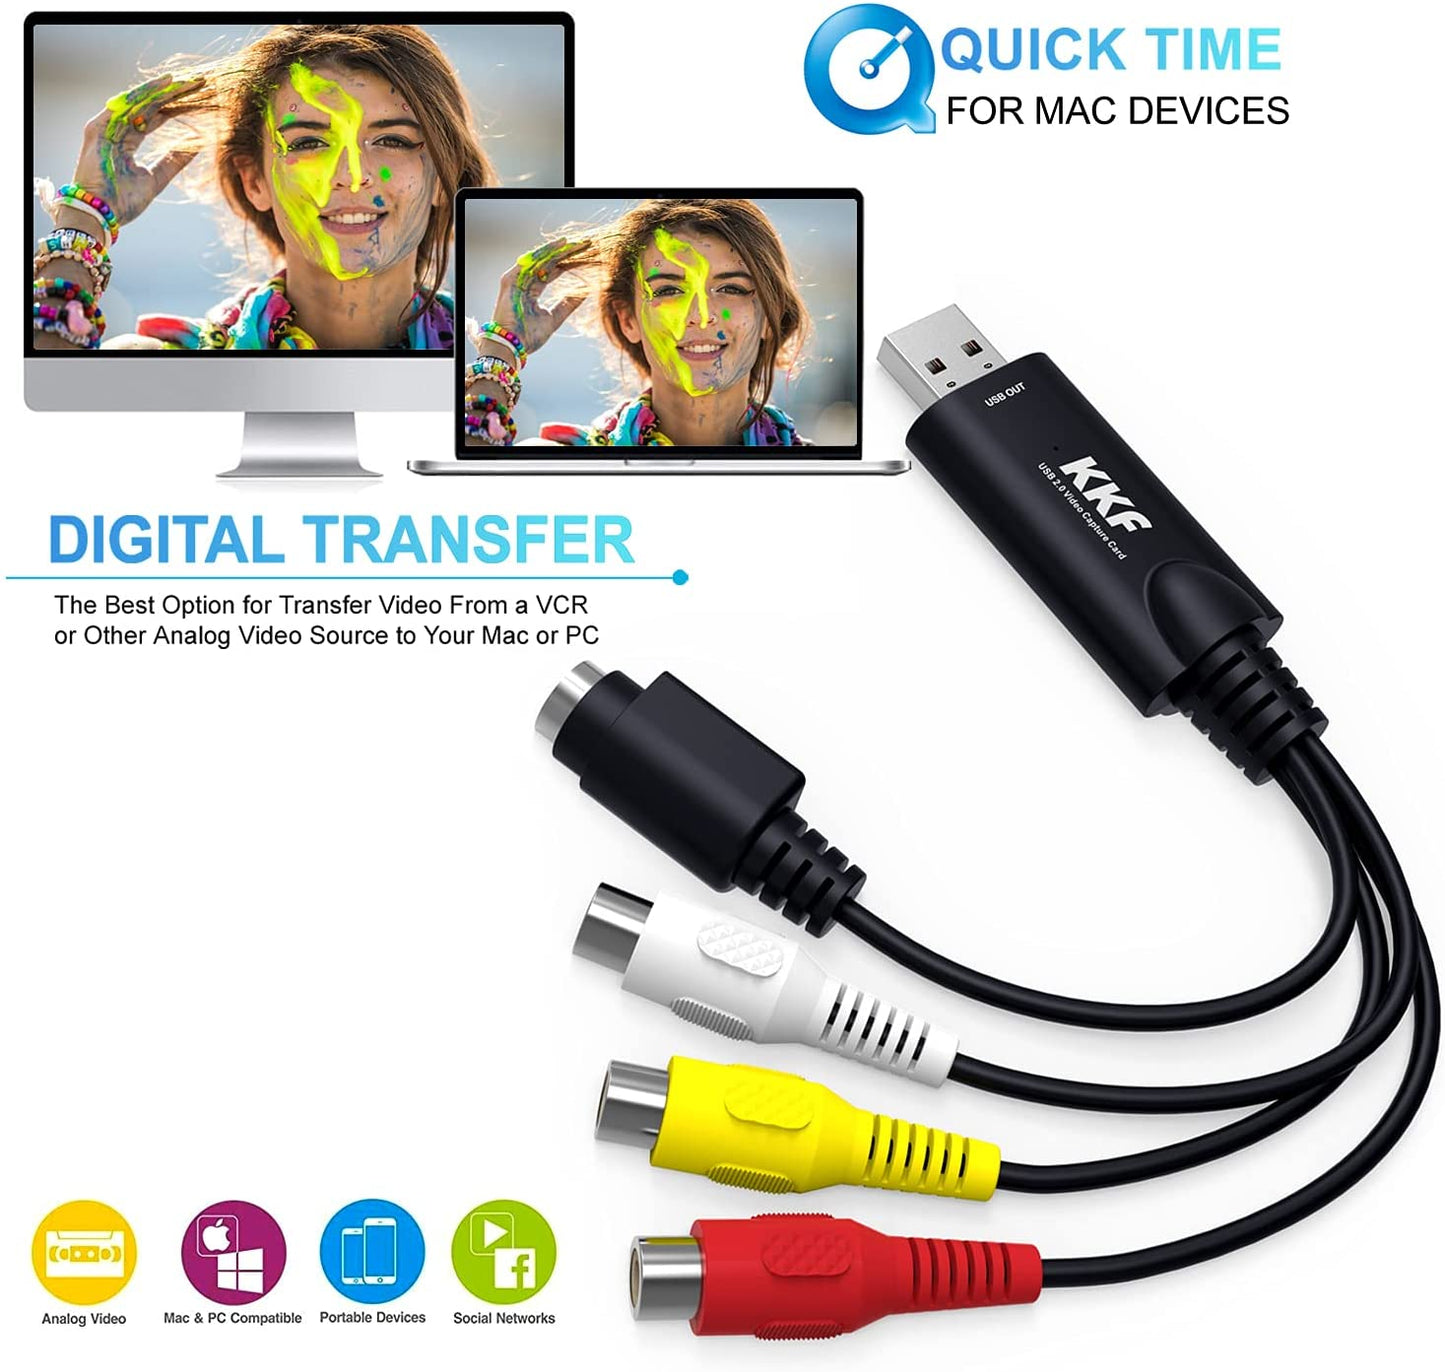 USB 2.0 Video Capture Card, Audio Video Converter Grabber Transfer VHS VCR TV to DVD Capture Analog Video to Digital for Windows 7 8 10 PC Mac OS